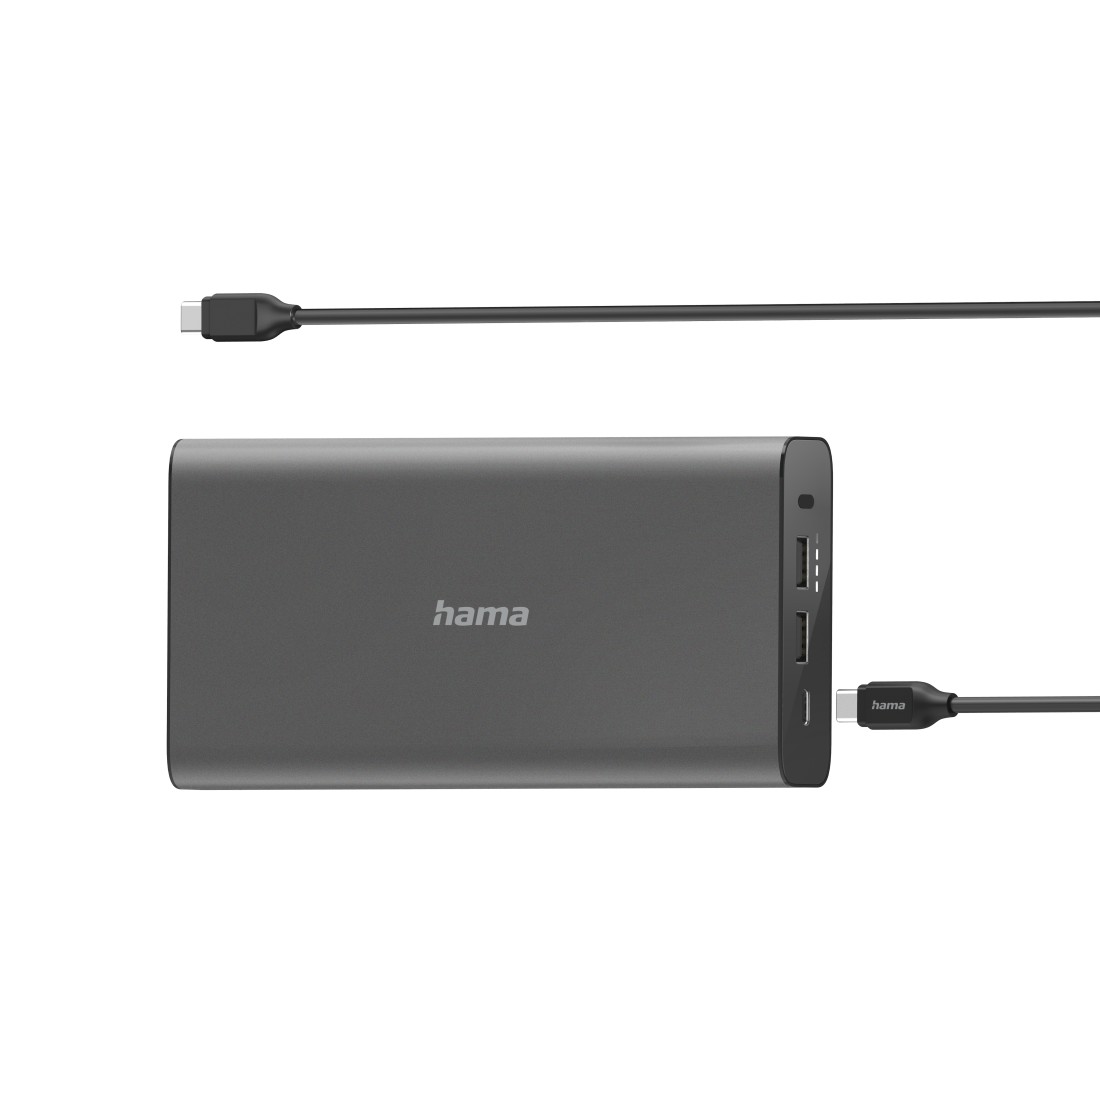 00200012 Hama Universal USB-C Power Pack, 26800 mAh, Power Delivery (PD),  5-20V/60W